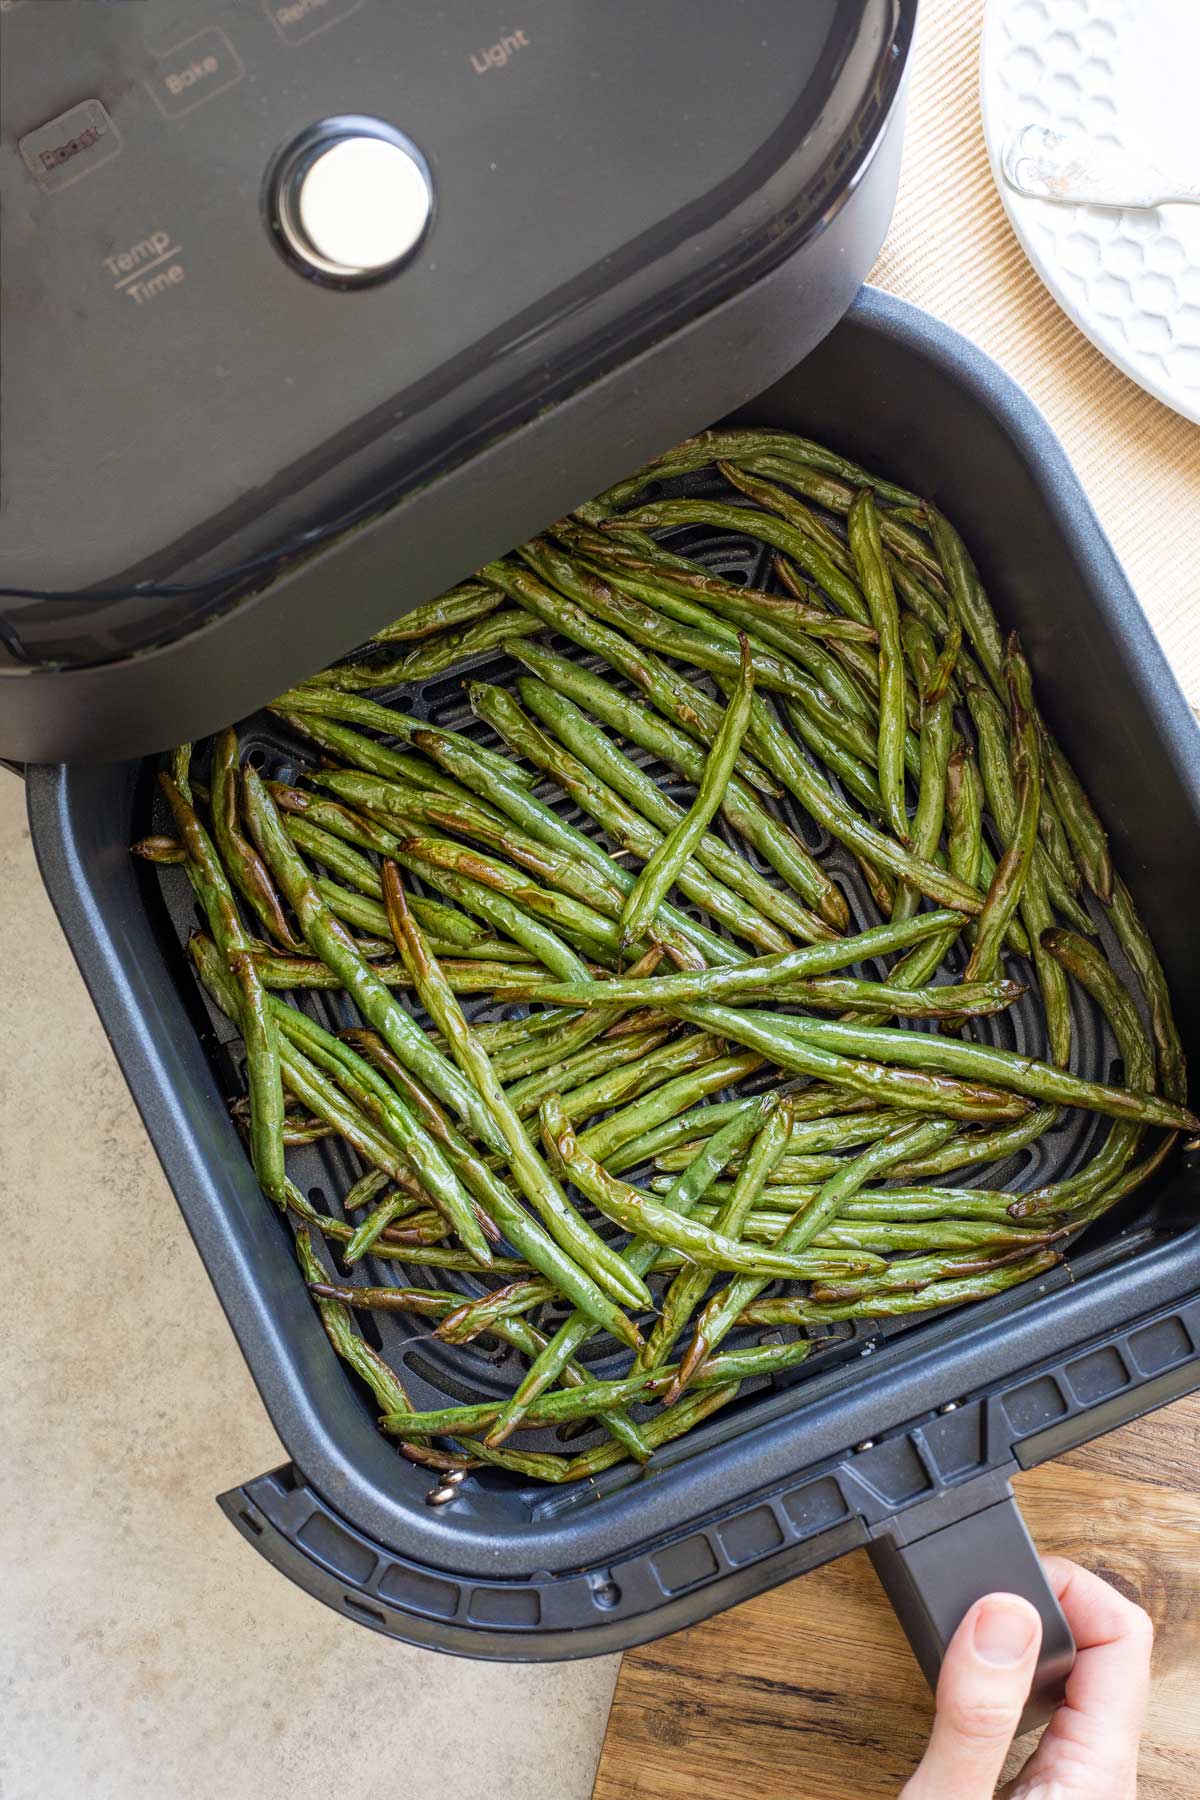 Hand pulling air fryer basket out to reveal cooked green beans.